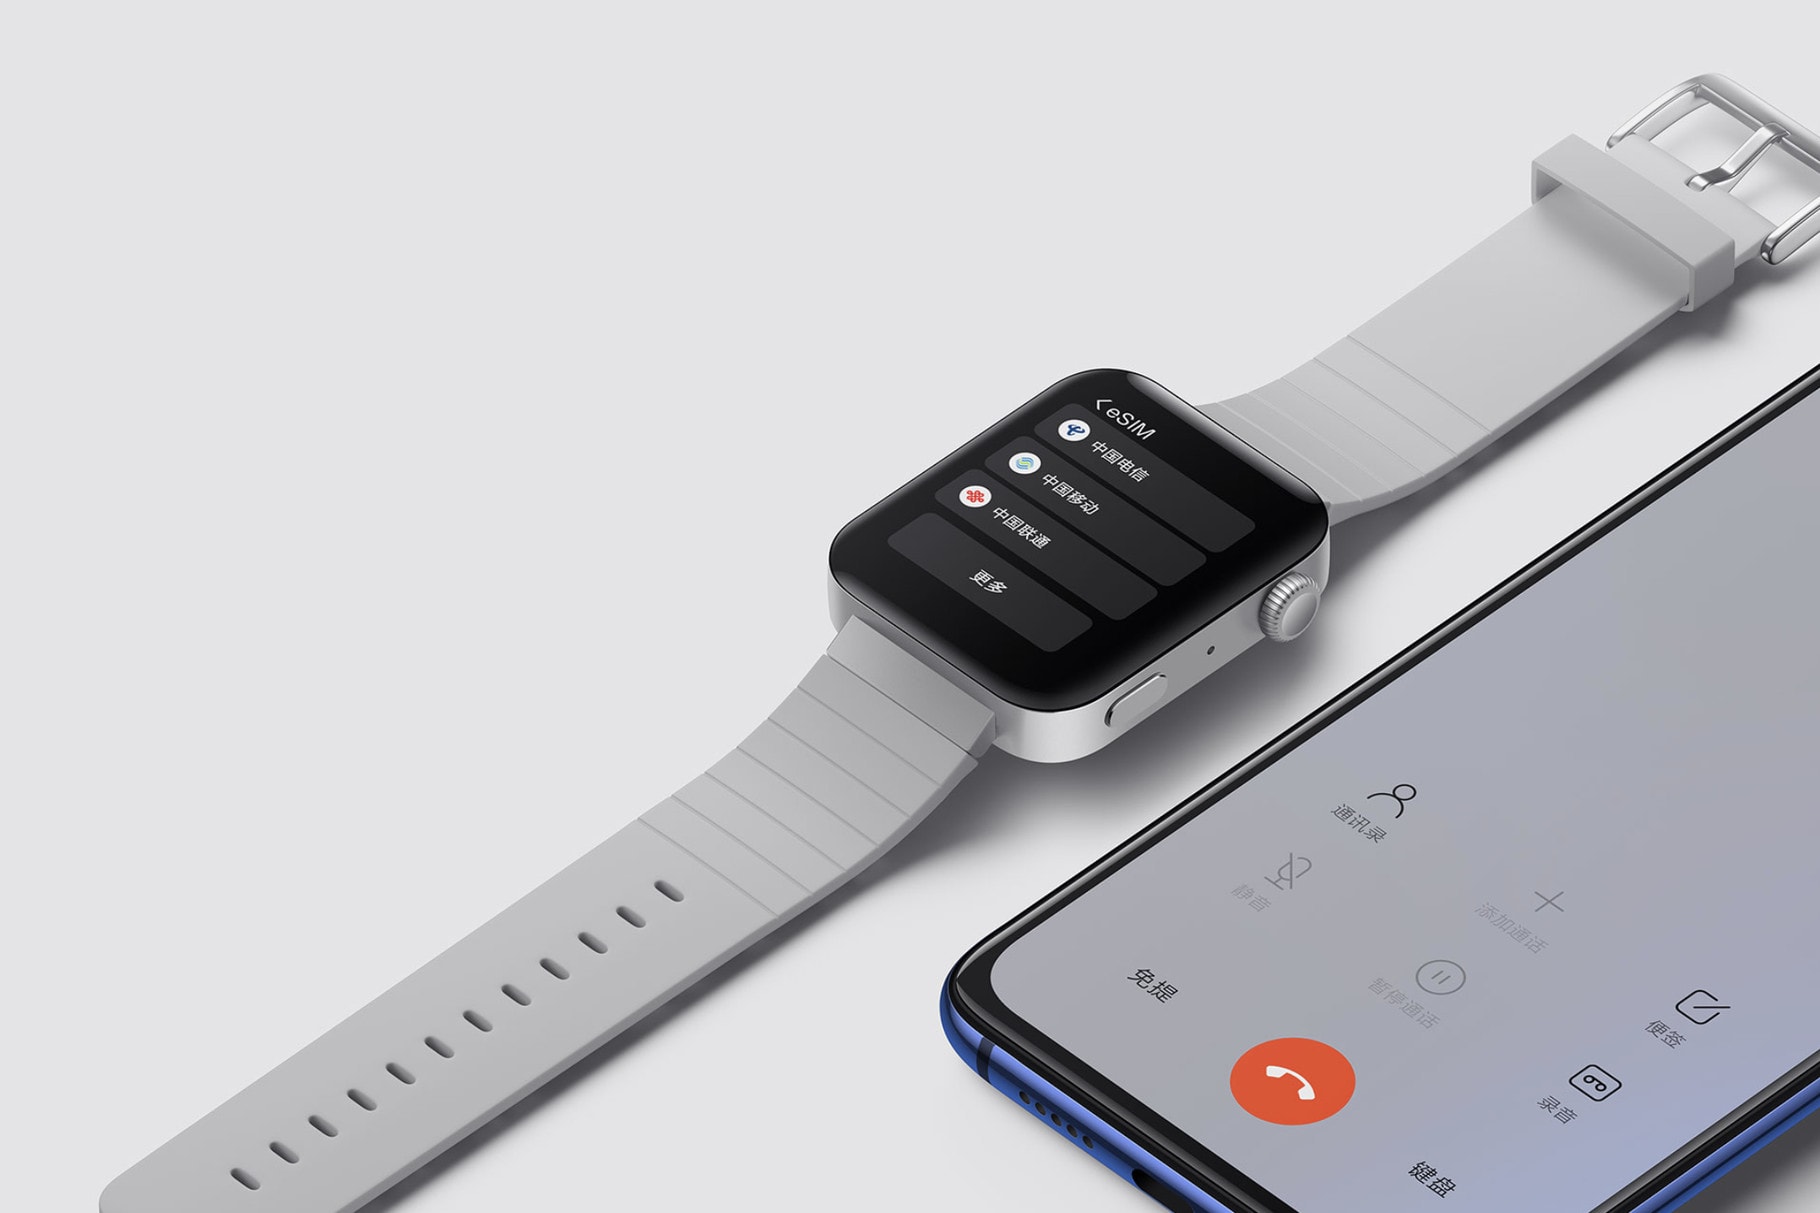 Xiaomi's Apple Watch clone packs some impressive features for just $185